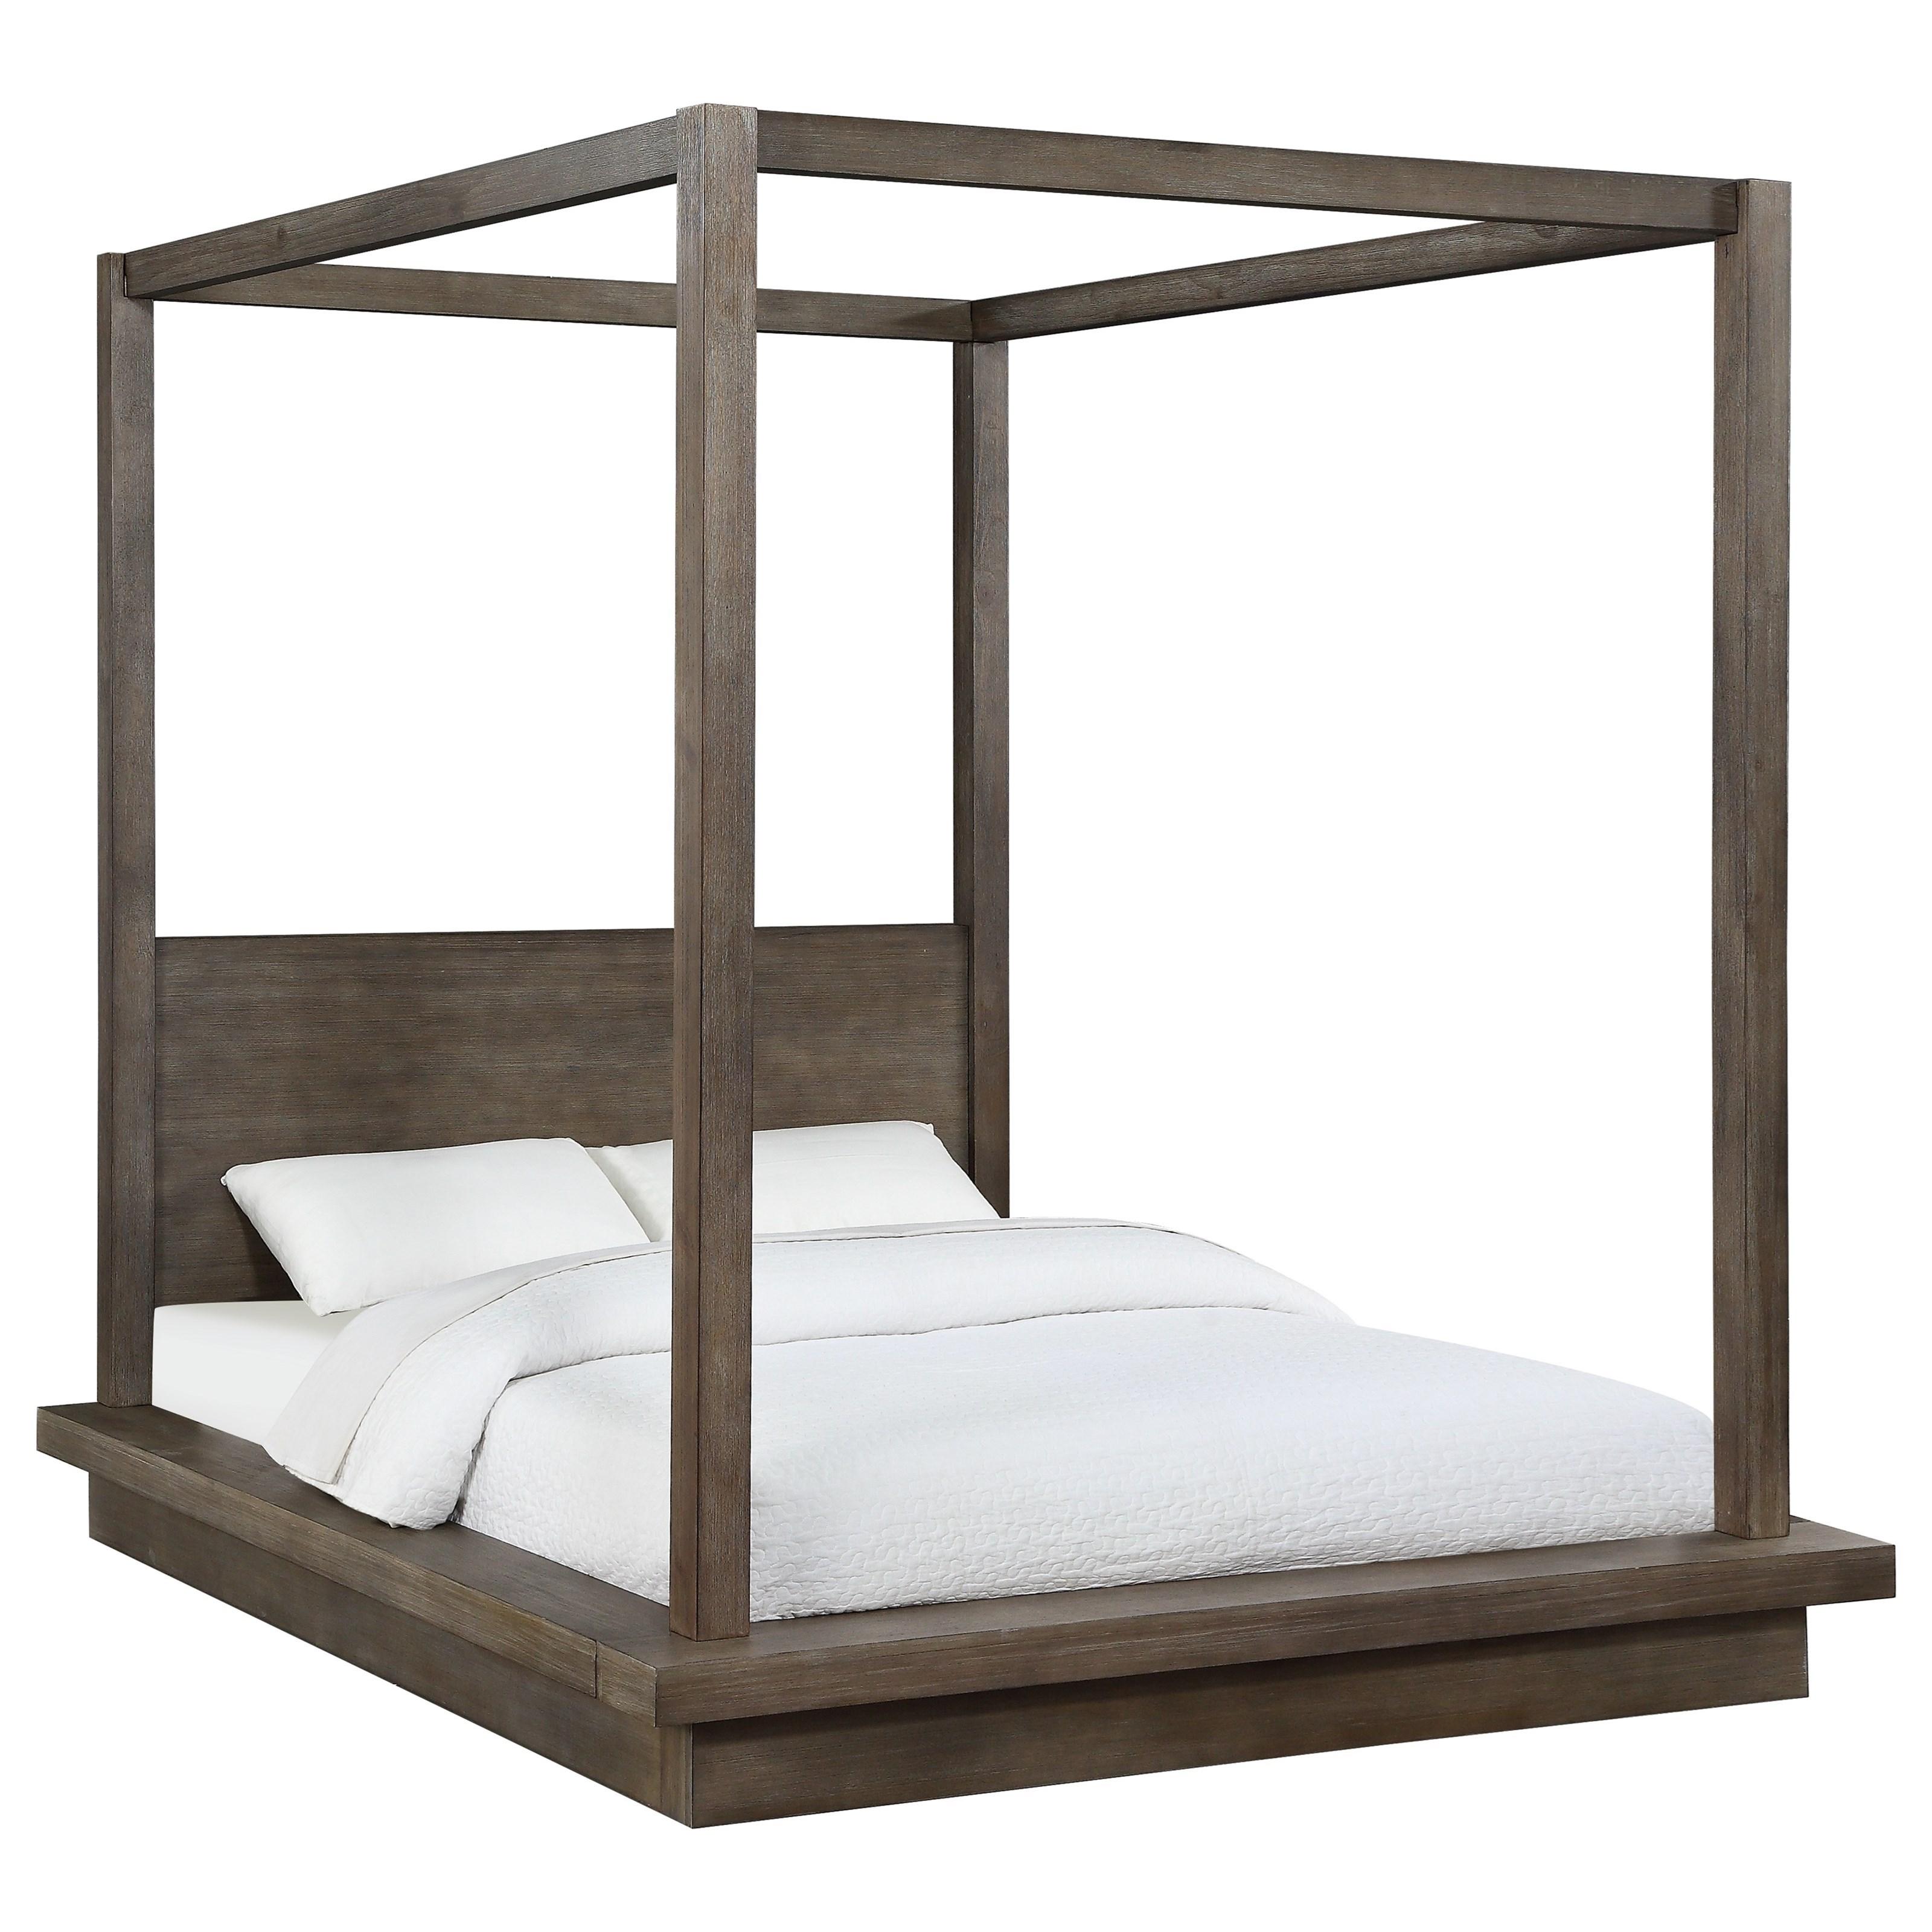 Contemporary, Rustic Canopy Bed MELBOURNE CANOPY 8D64F4 in Brown 